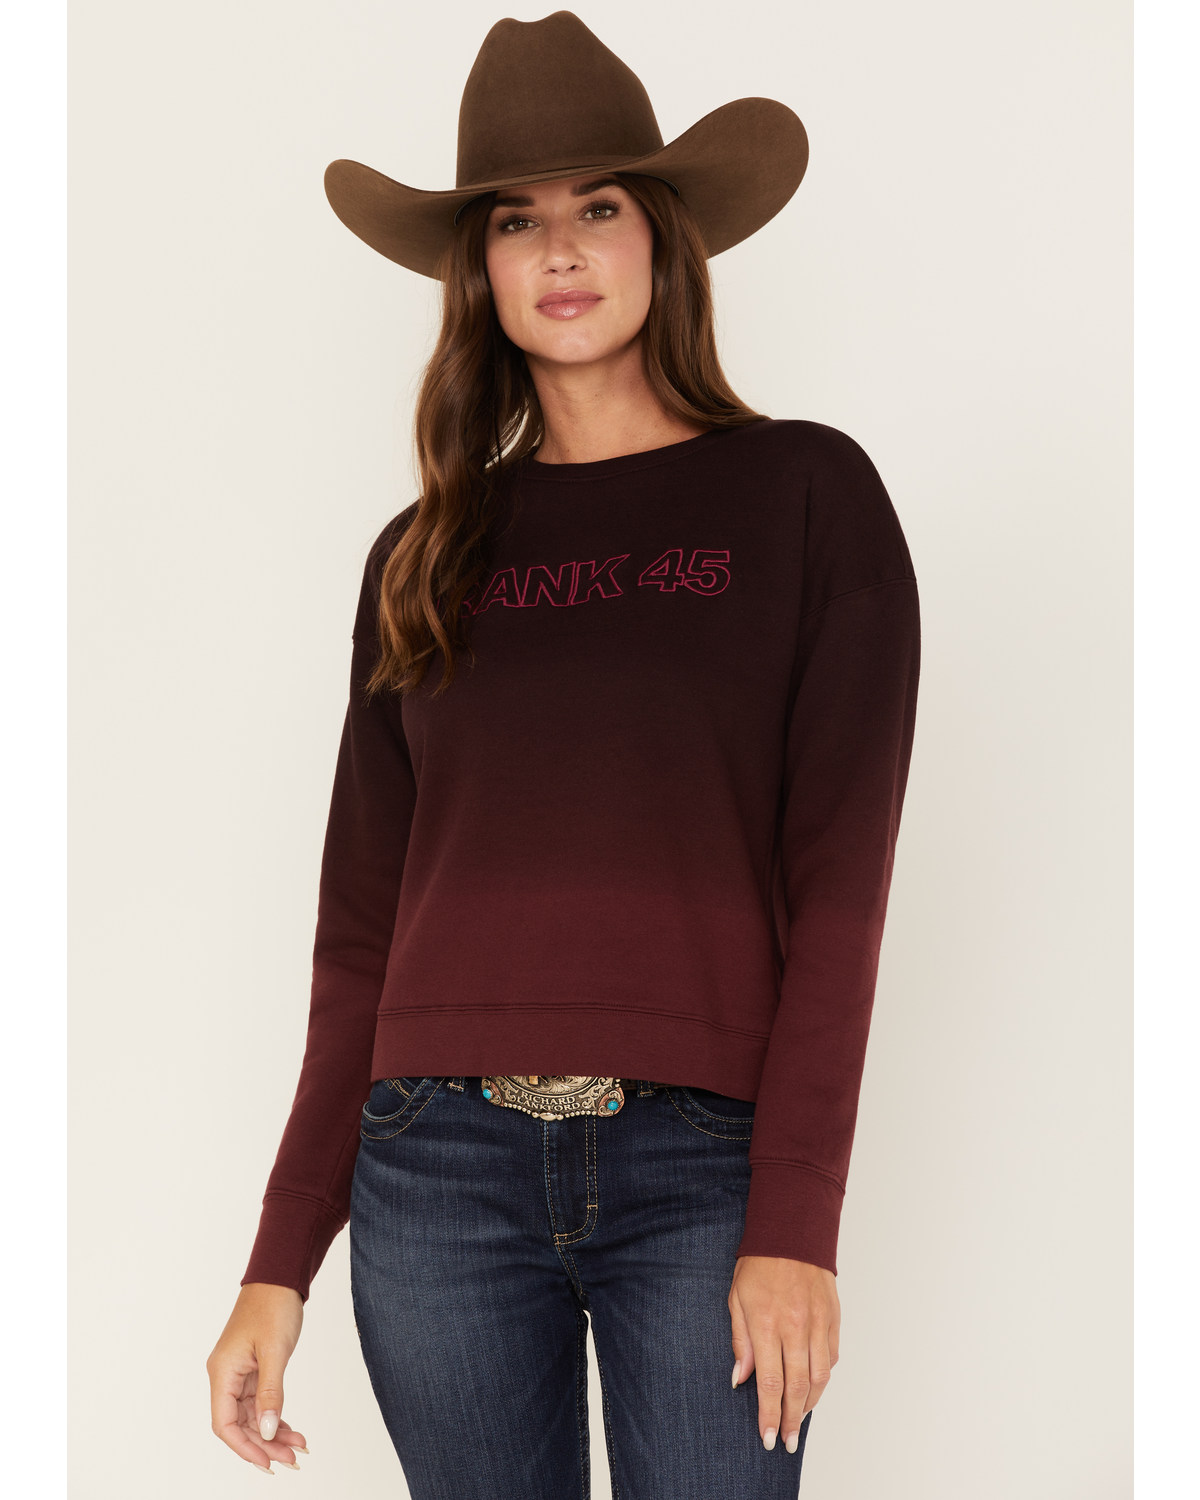 RANK 45® Women's Long Sleeve Ombre Pullover Sweater